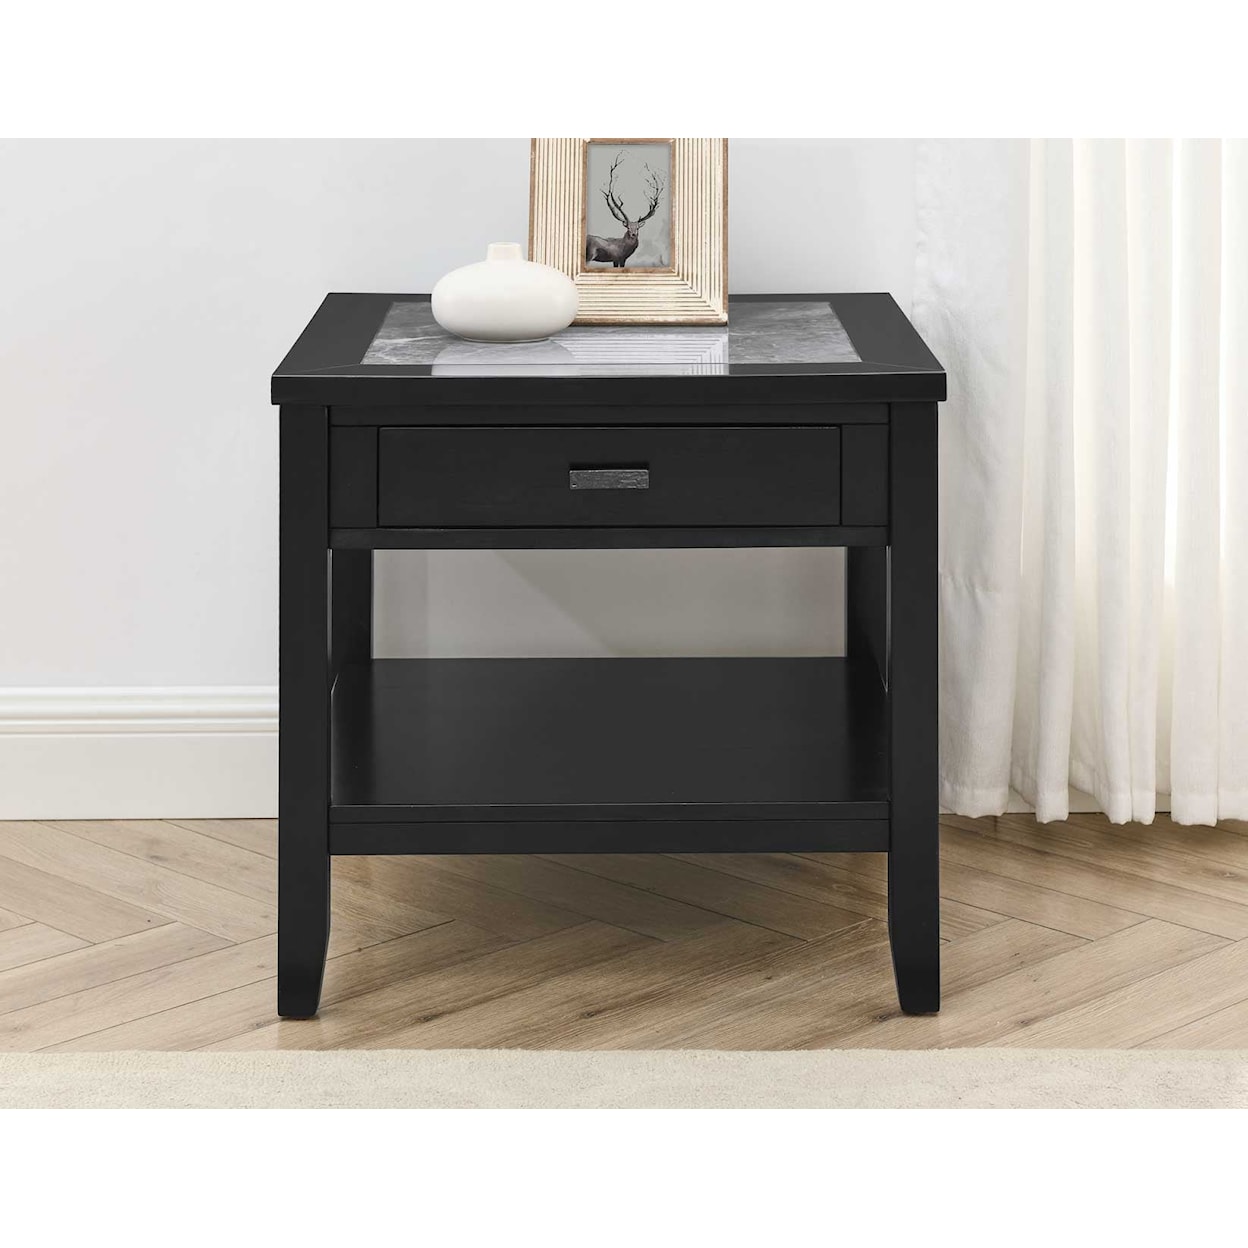 Steve Silver Garvine End Table with Storage